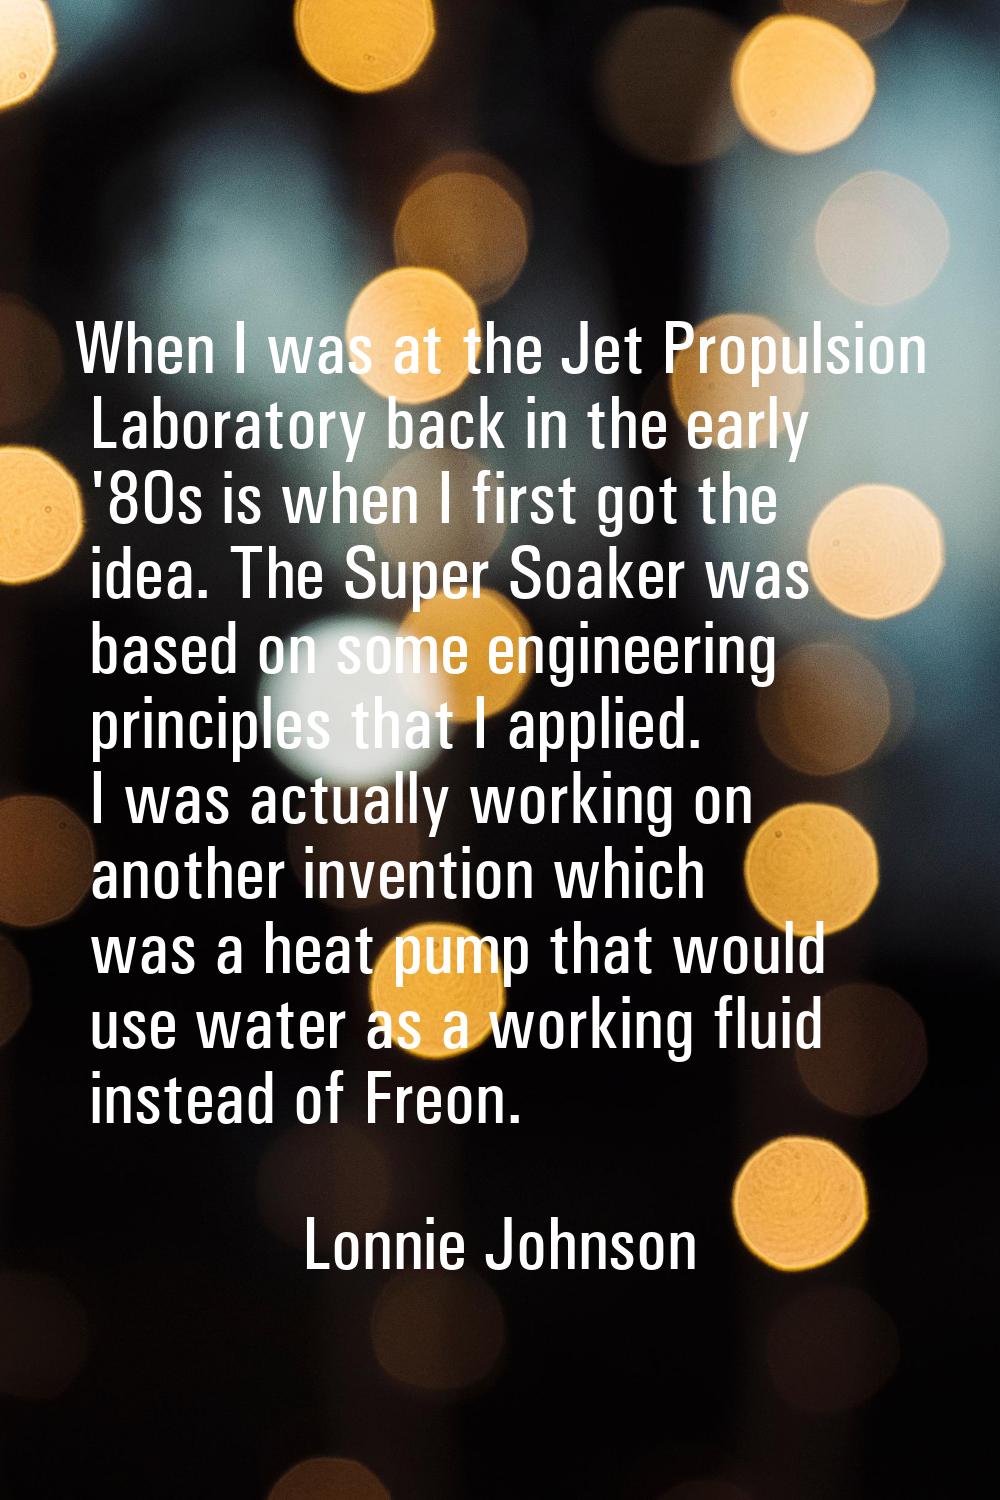 When I was at the Jet Propulsion Laboratory back in the early '80s is when I first got the idea. Th